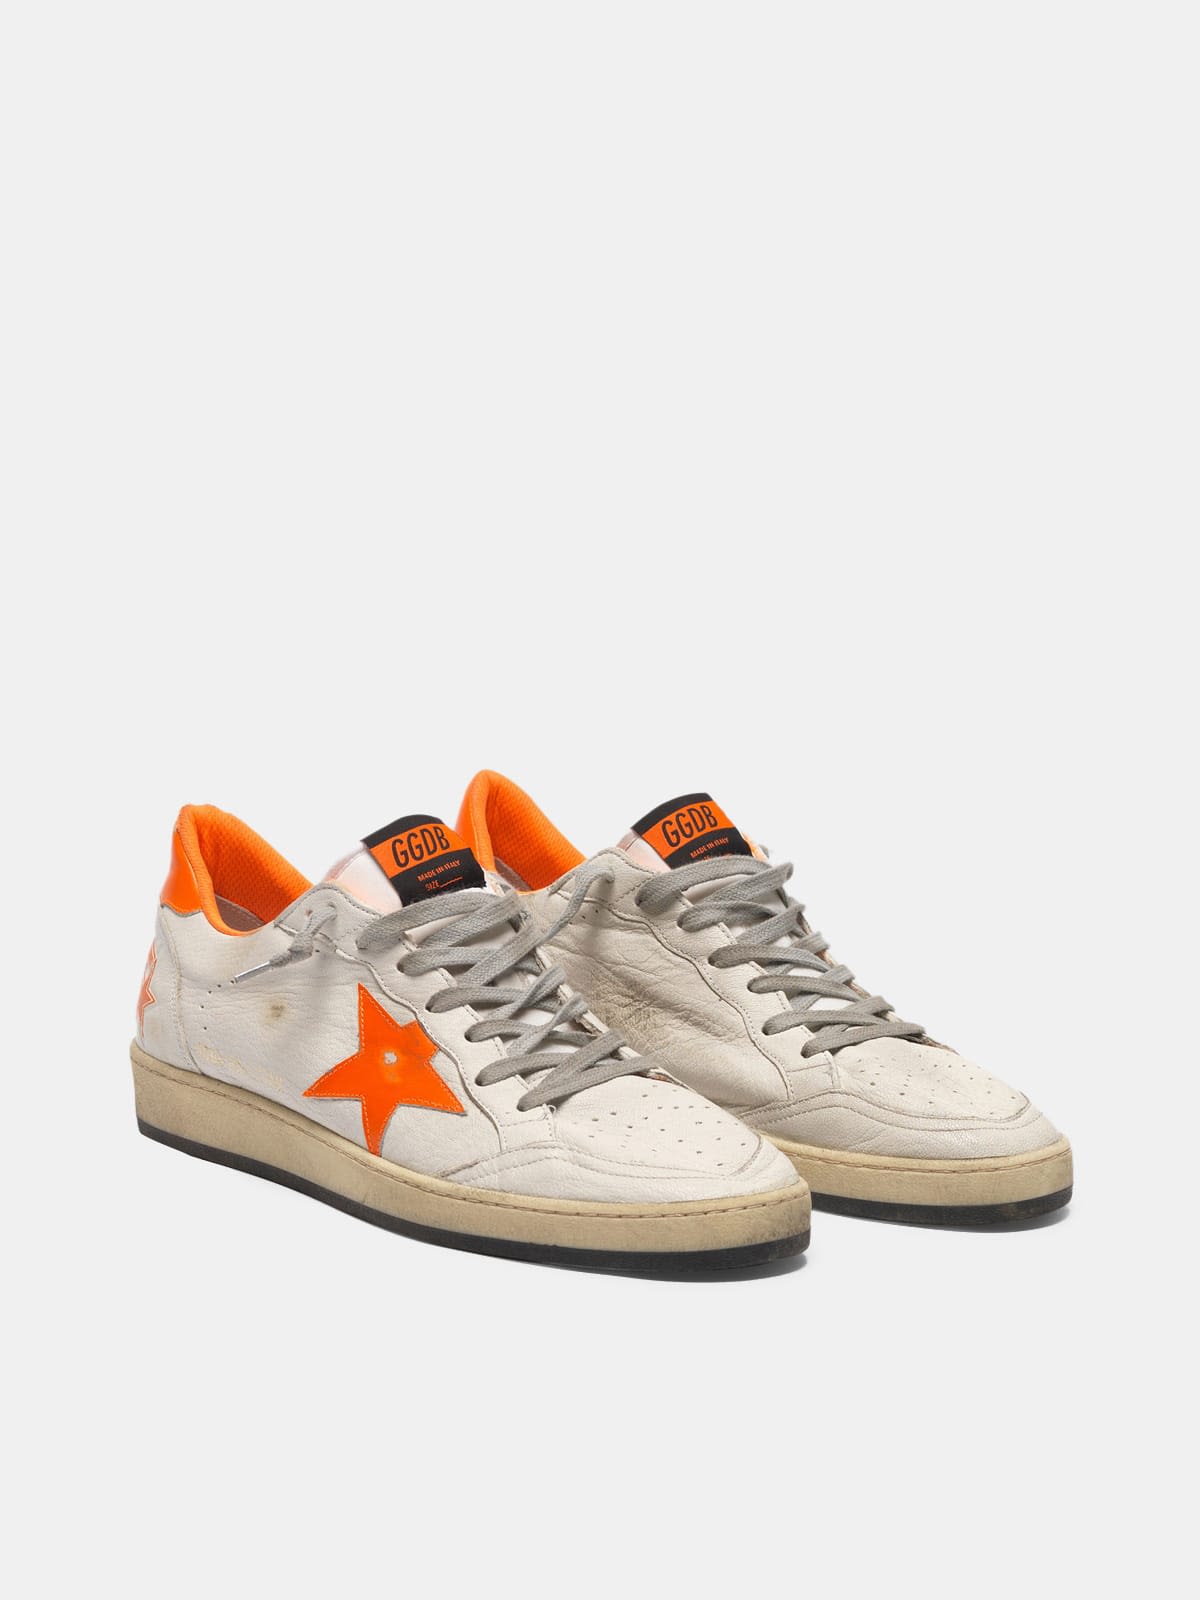 Ball Star sneakers in leather with dayglow details and lining